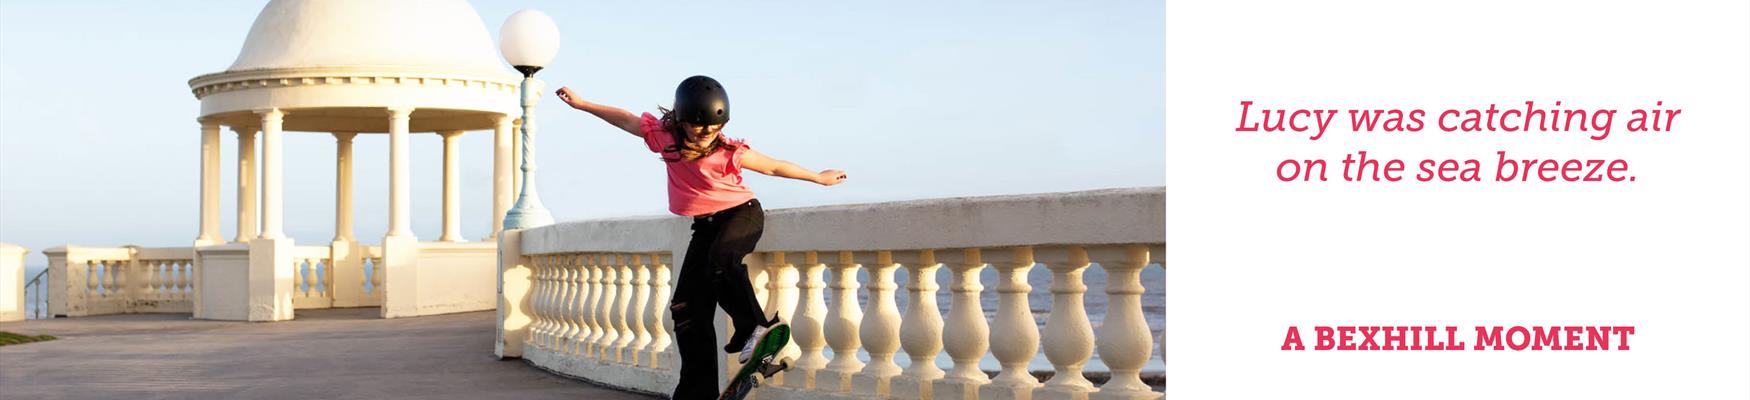 A photograph of a young girl on a skateboard with the front wheels in the air, she wears a helmet and her arms are outstretched. She is on a concrete terrace with a domed white structure in the background. The caption next to the photograph reads “Lucy was catching the air on the sea breeze”.